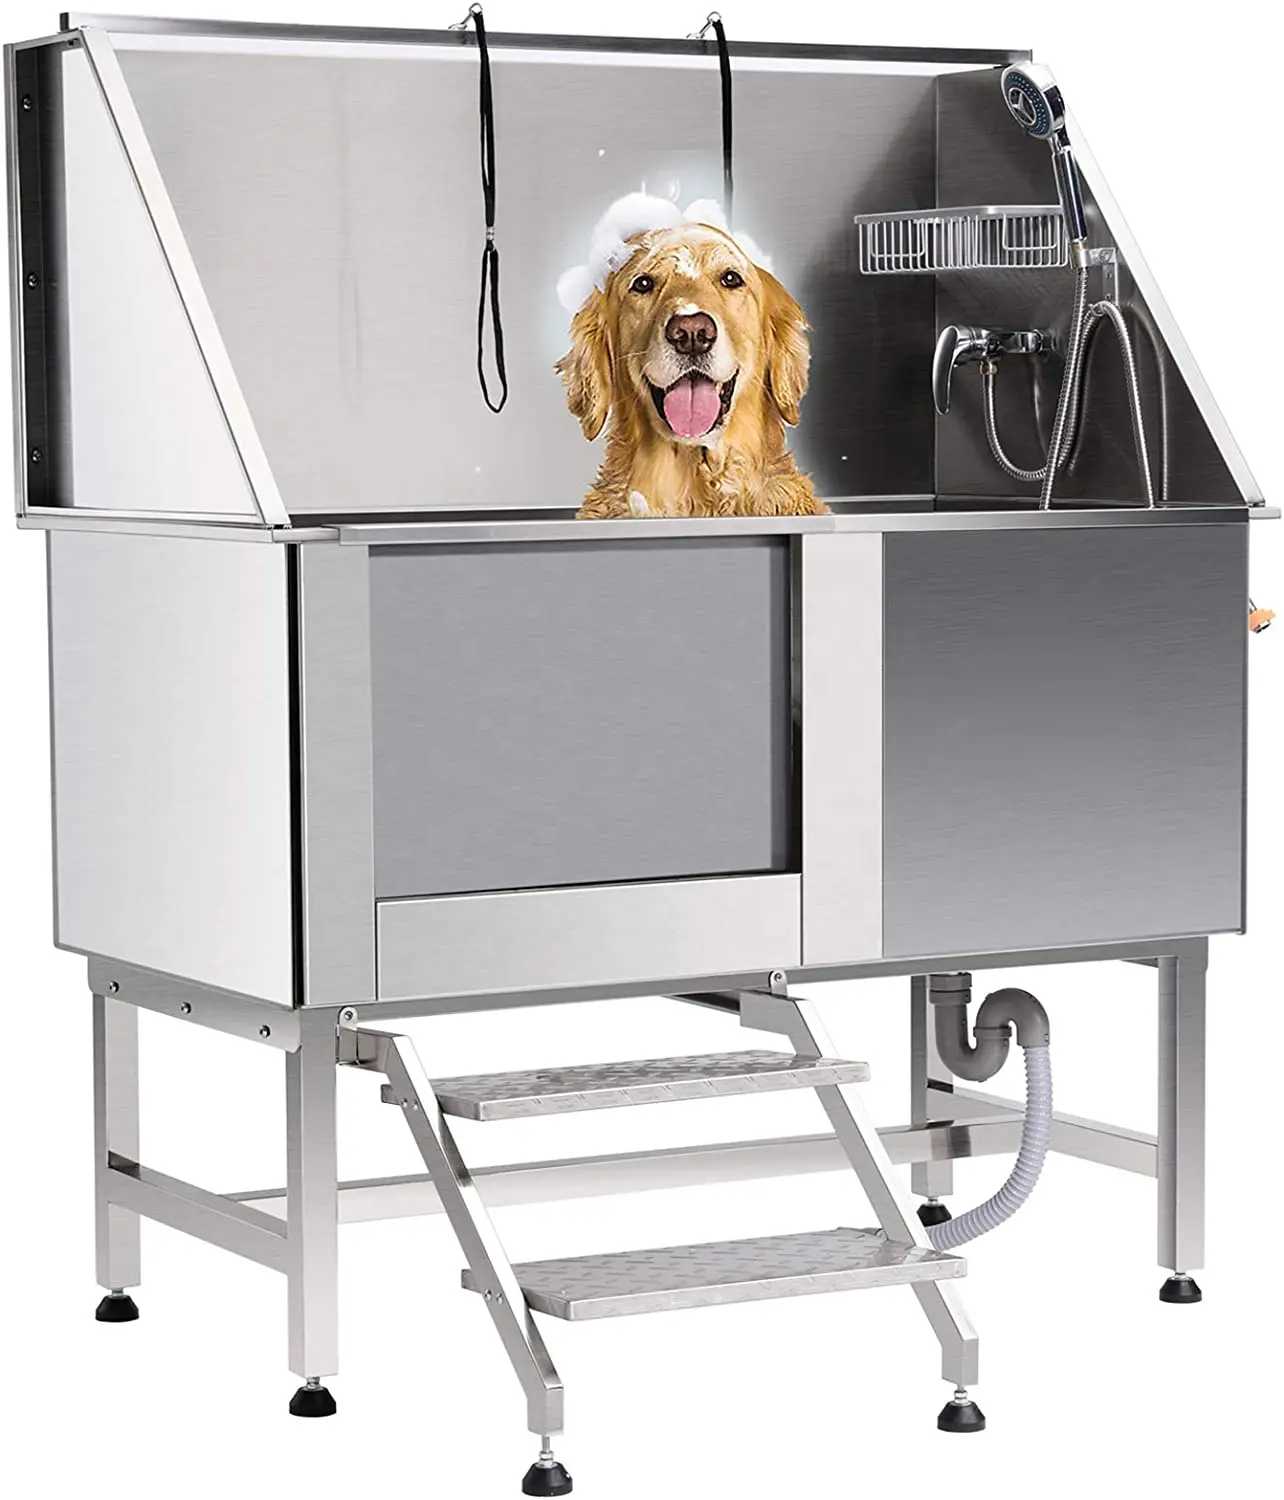 High Quality Pet Spa Tub Superior Stainless Steel Dog Grooming Bath Tub For Sale